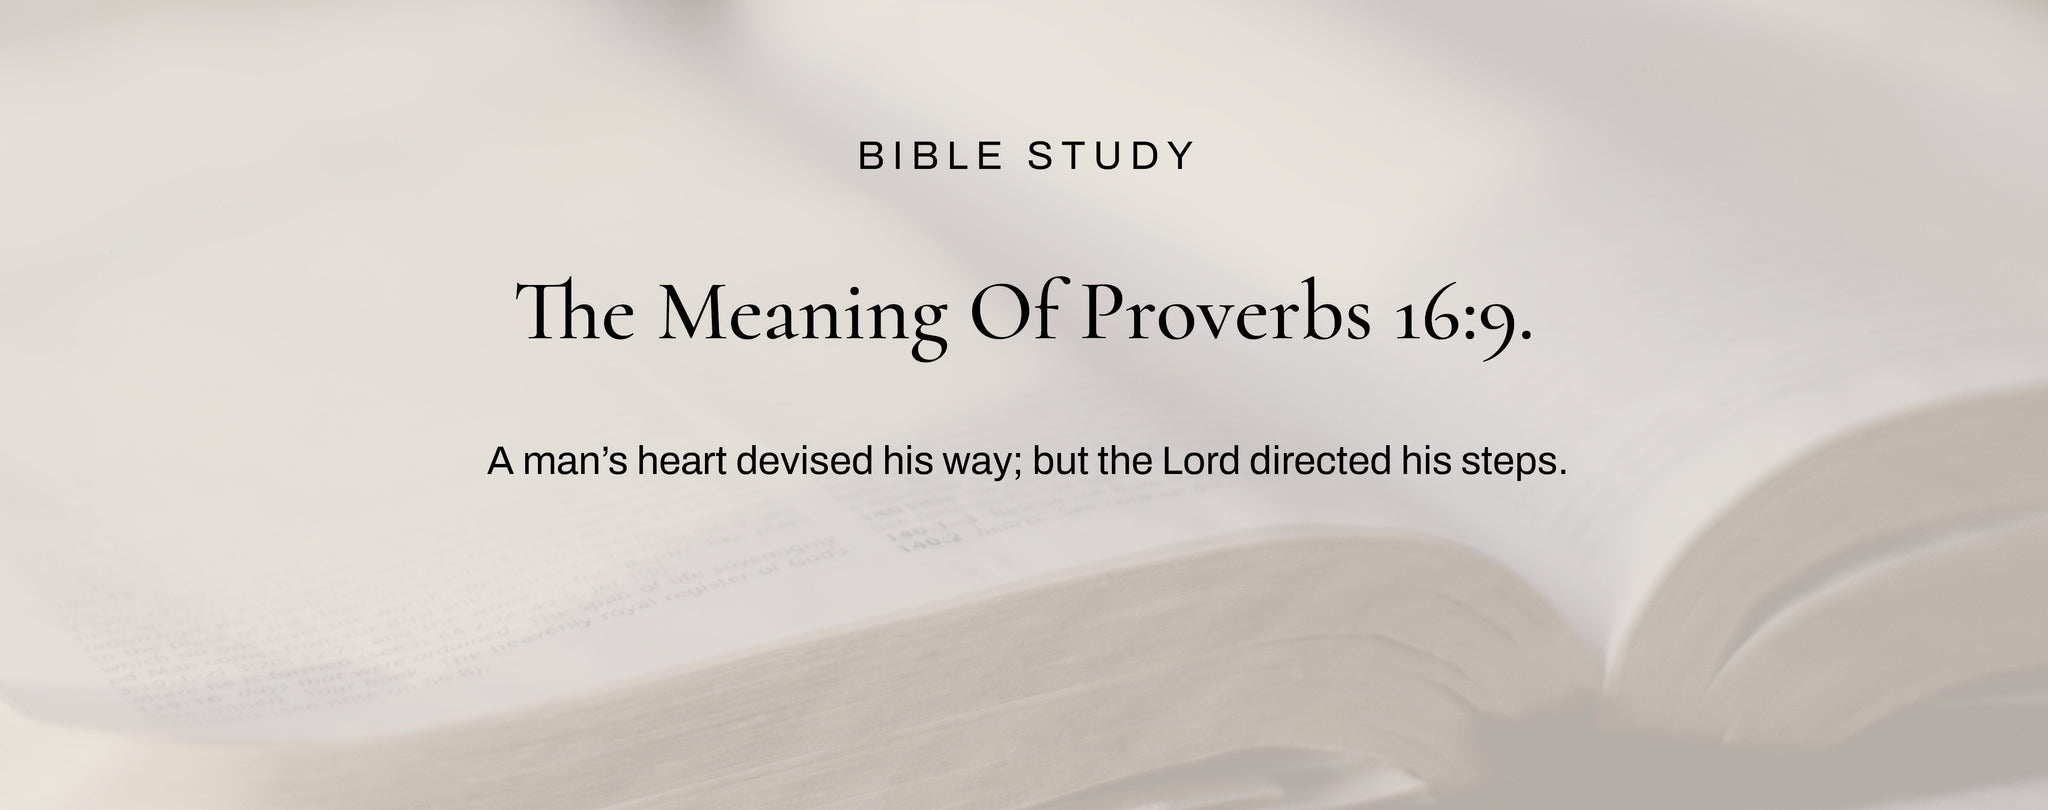 proverbs 16 9 meaning